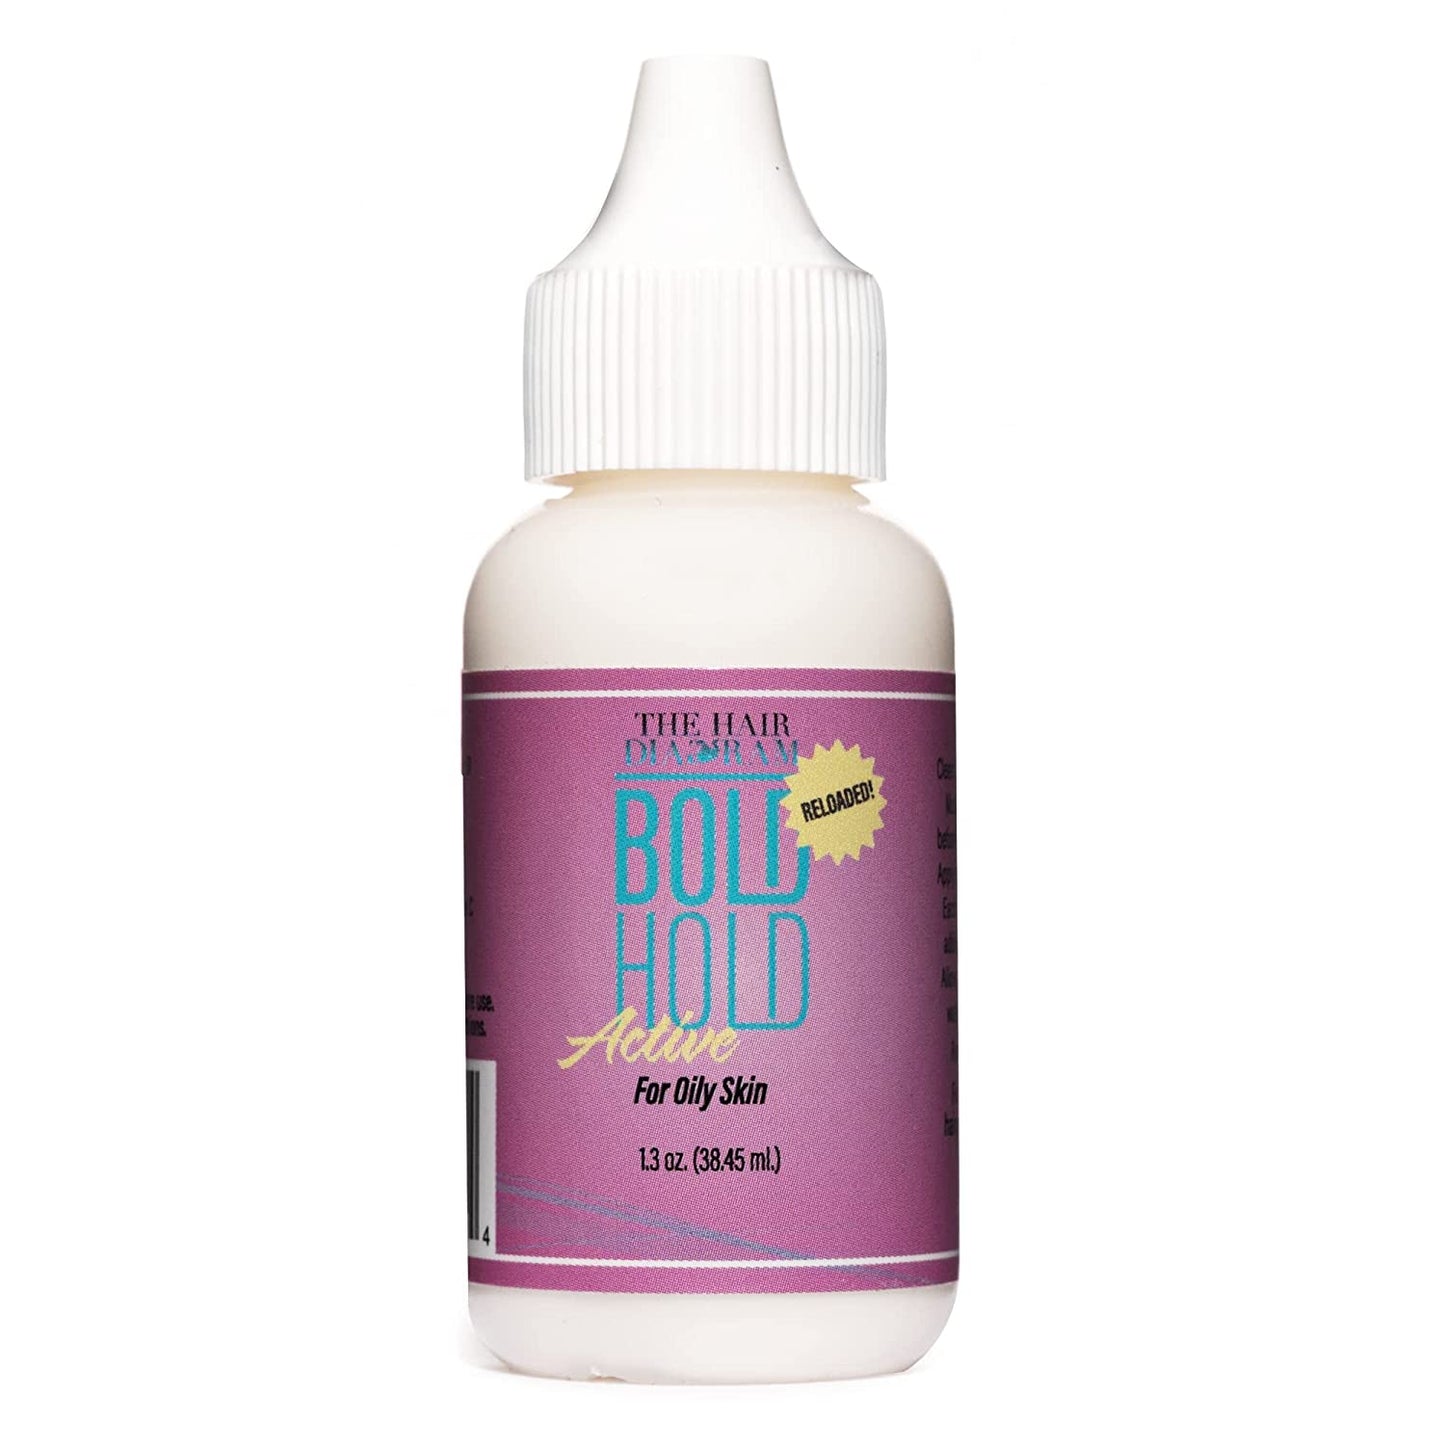 Bold Hold Active Wig Glue